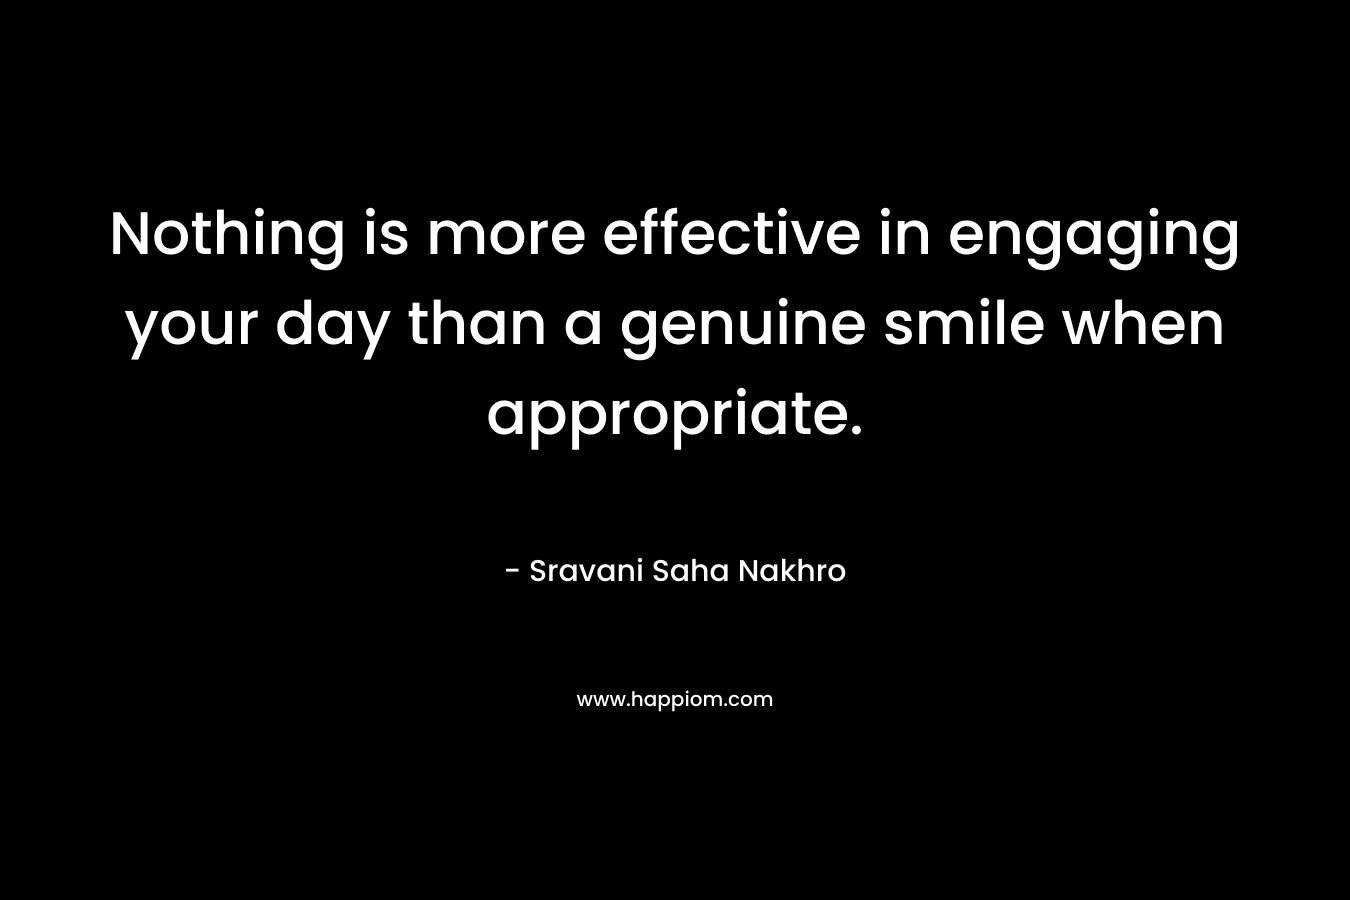 Nothing is more effective in engaging your day than a genuine smile when appropriate. – Sravani Saha Nakhro